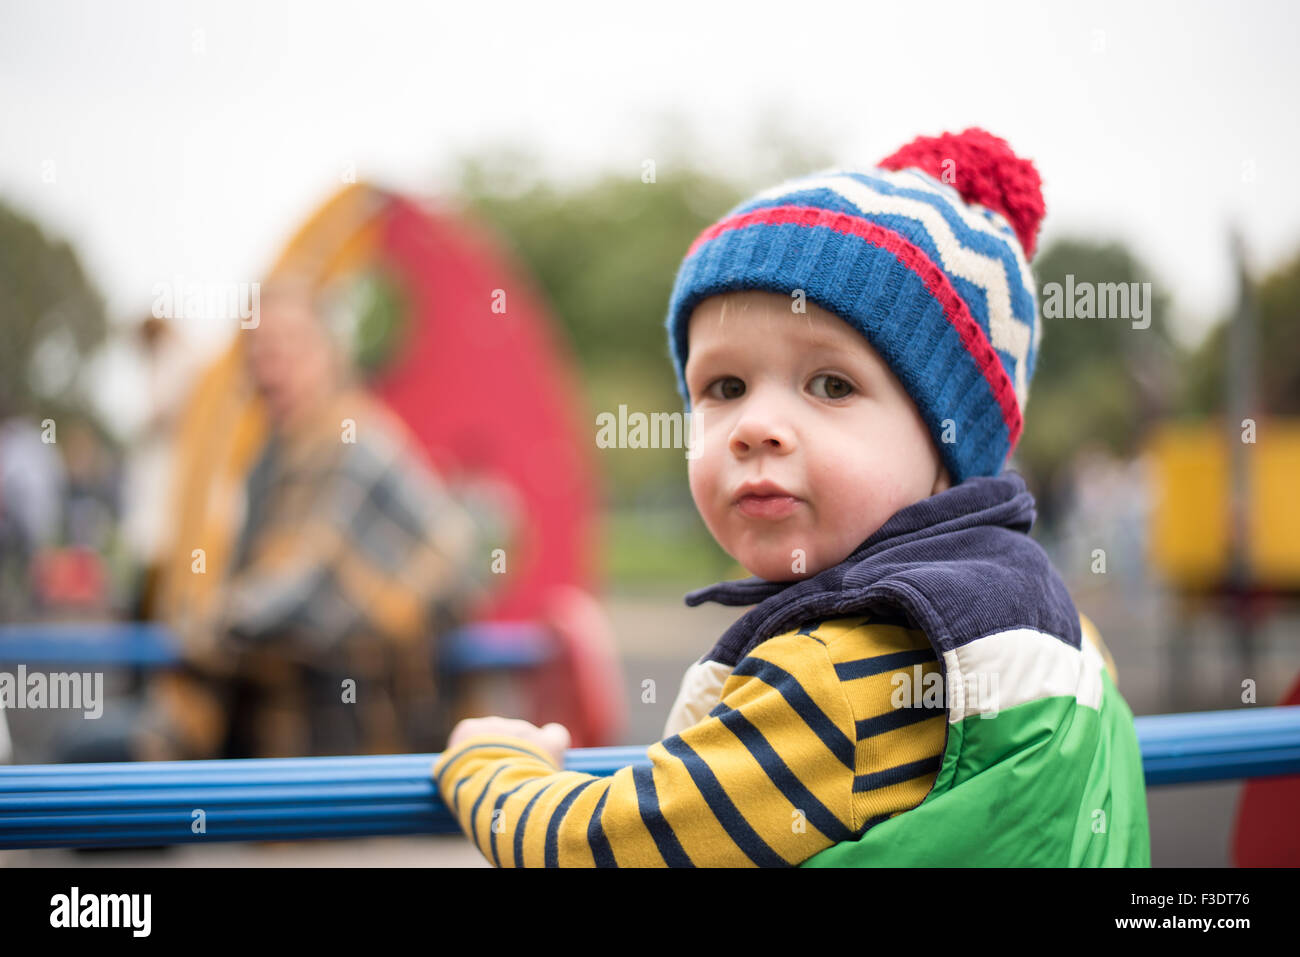 Young Boy playing in park Stock Photo